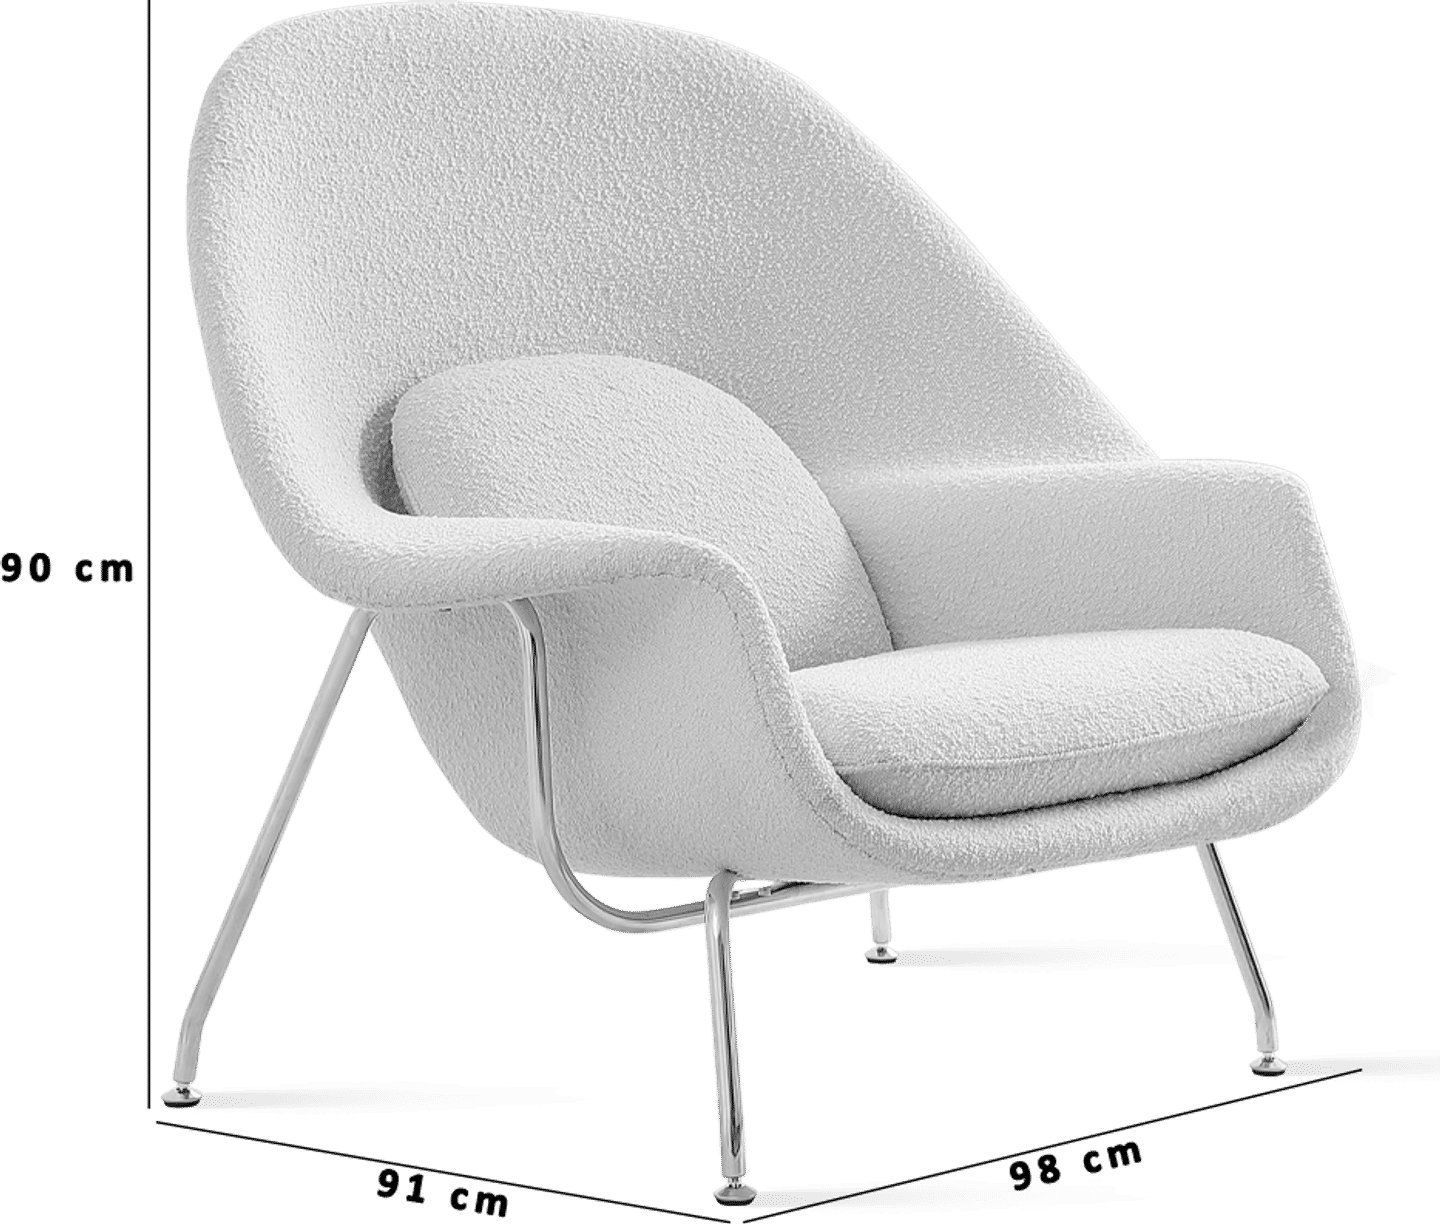 Womb Chair - Schnalle Creamy Boucle/Boucle image.